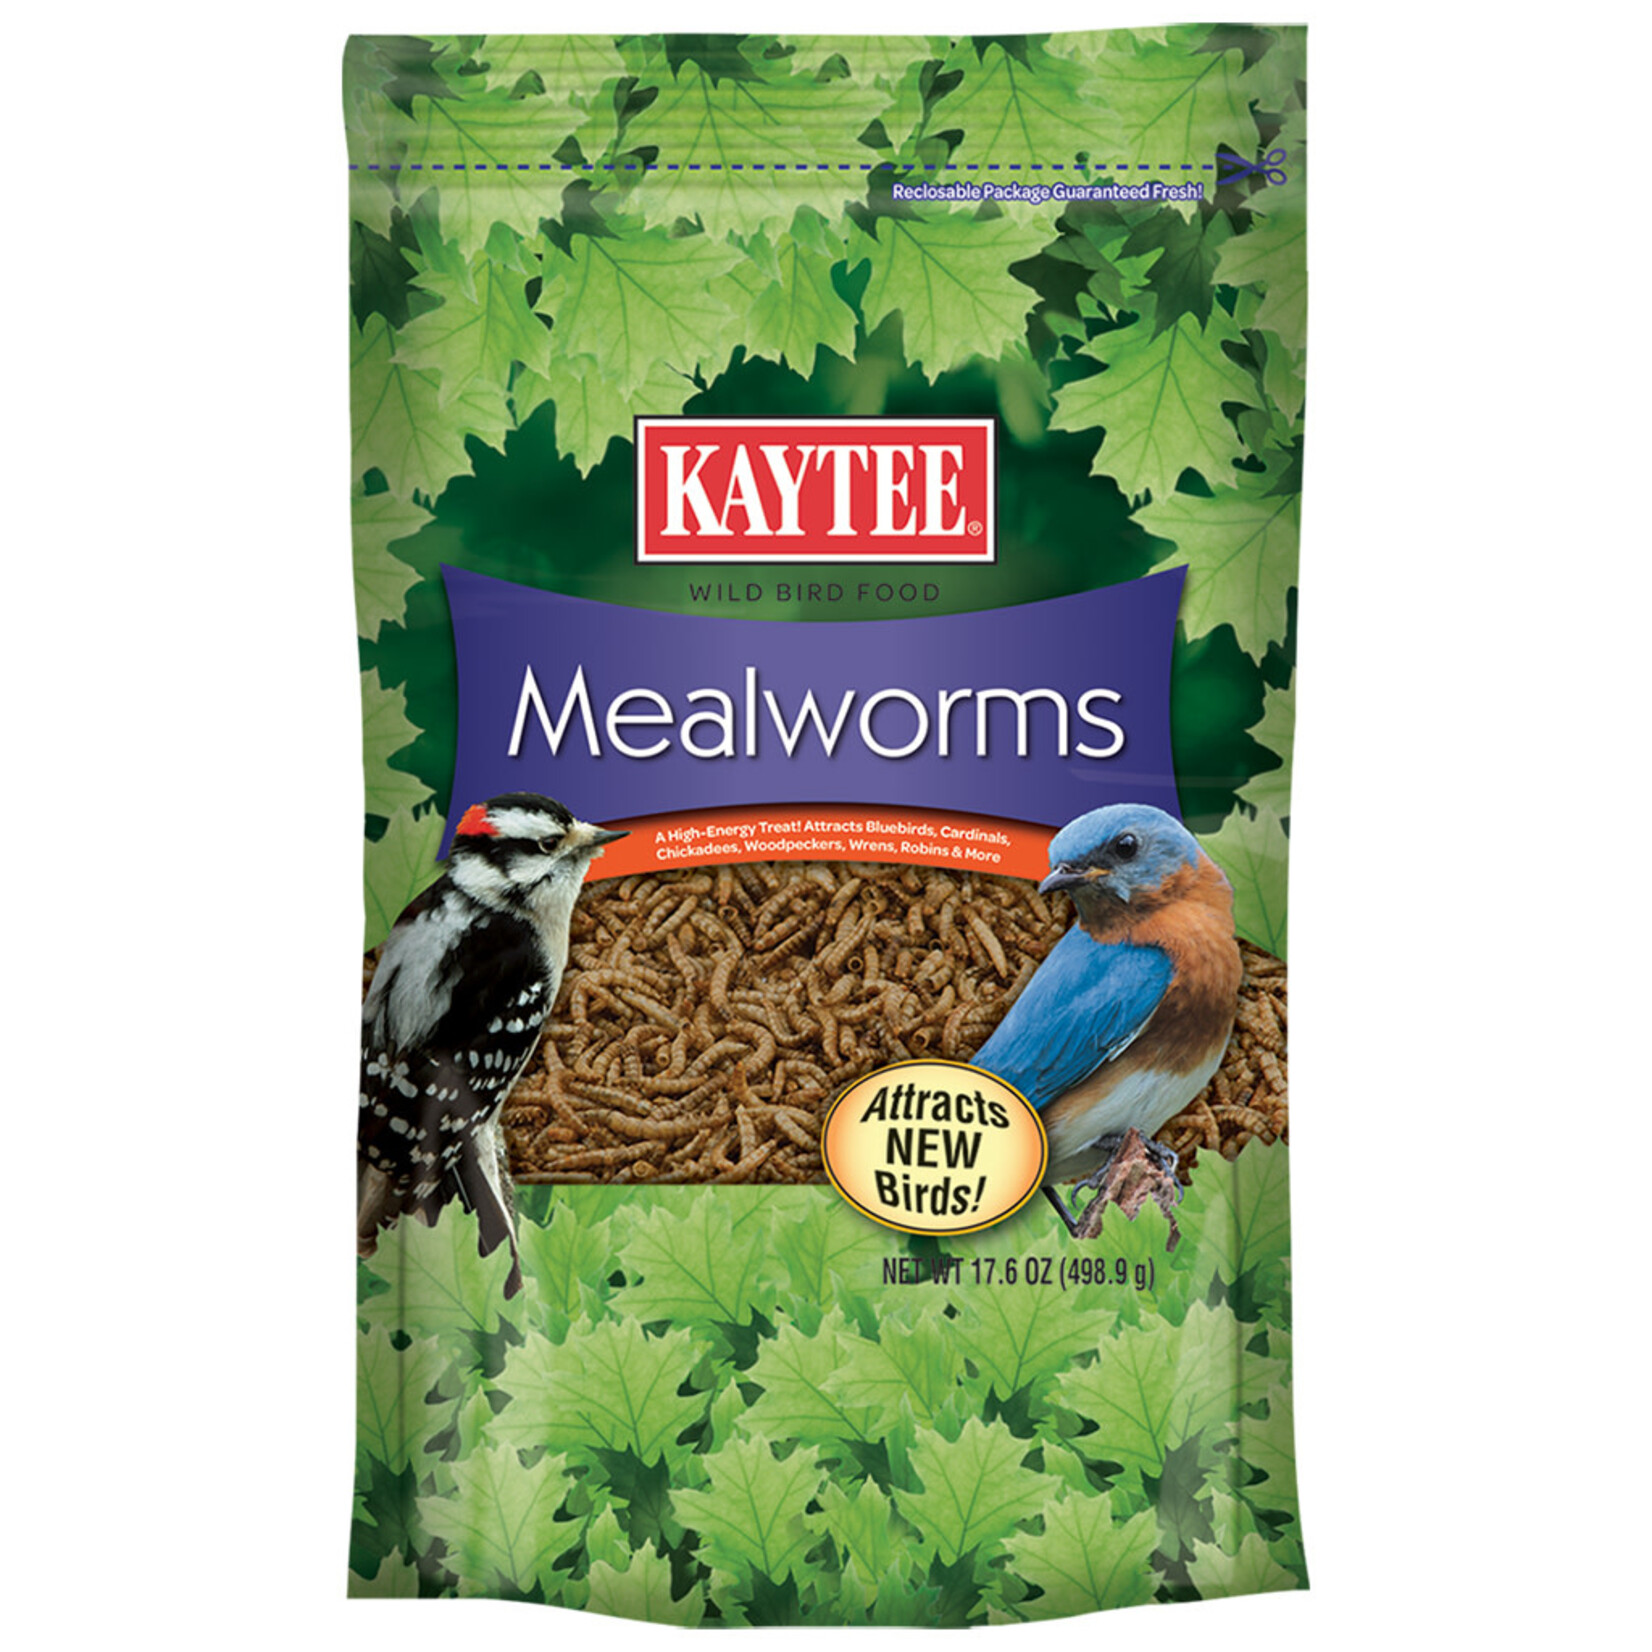 KAYTEE PRODUCTS INC Dried Mealworms 17.6OZ